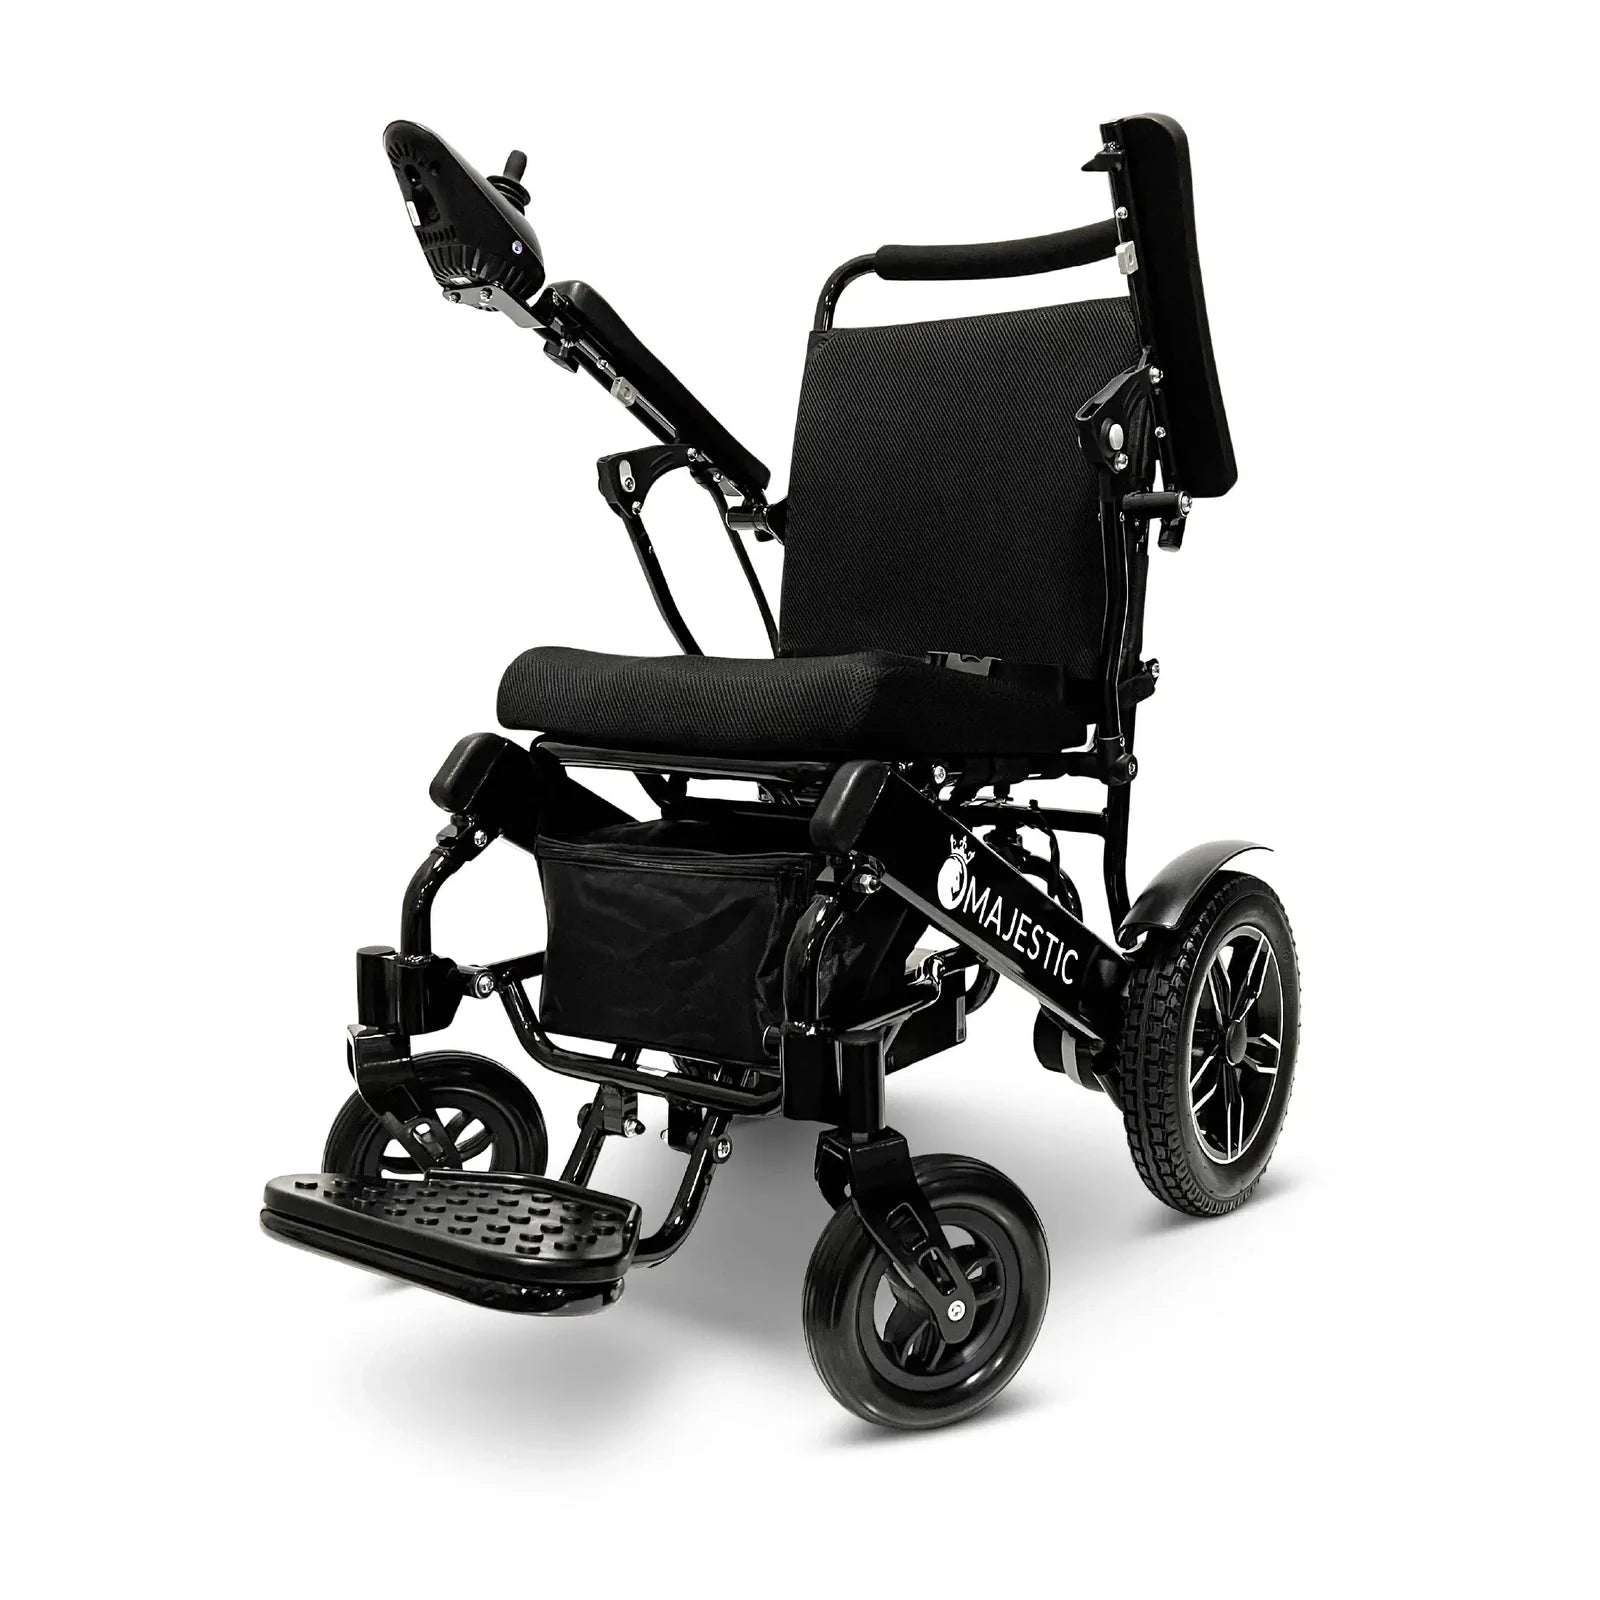 ComfyGO Majestic IQ-8000 Remote Controlled Lightweight Folding Electric Wheelchair Power Wheelchairs ComfyGO Black Standard 10 Miles & 17.5" Seat Width